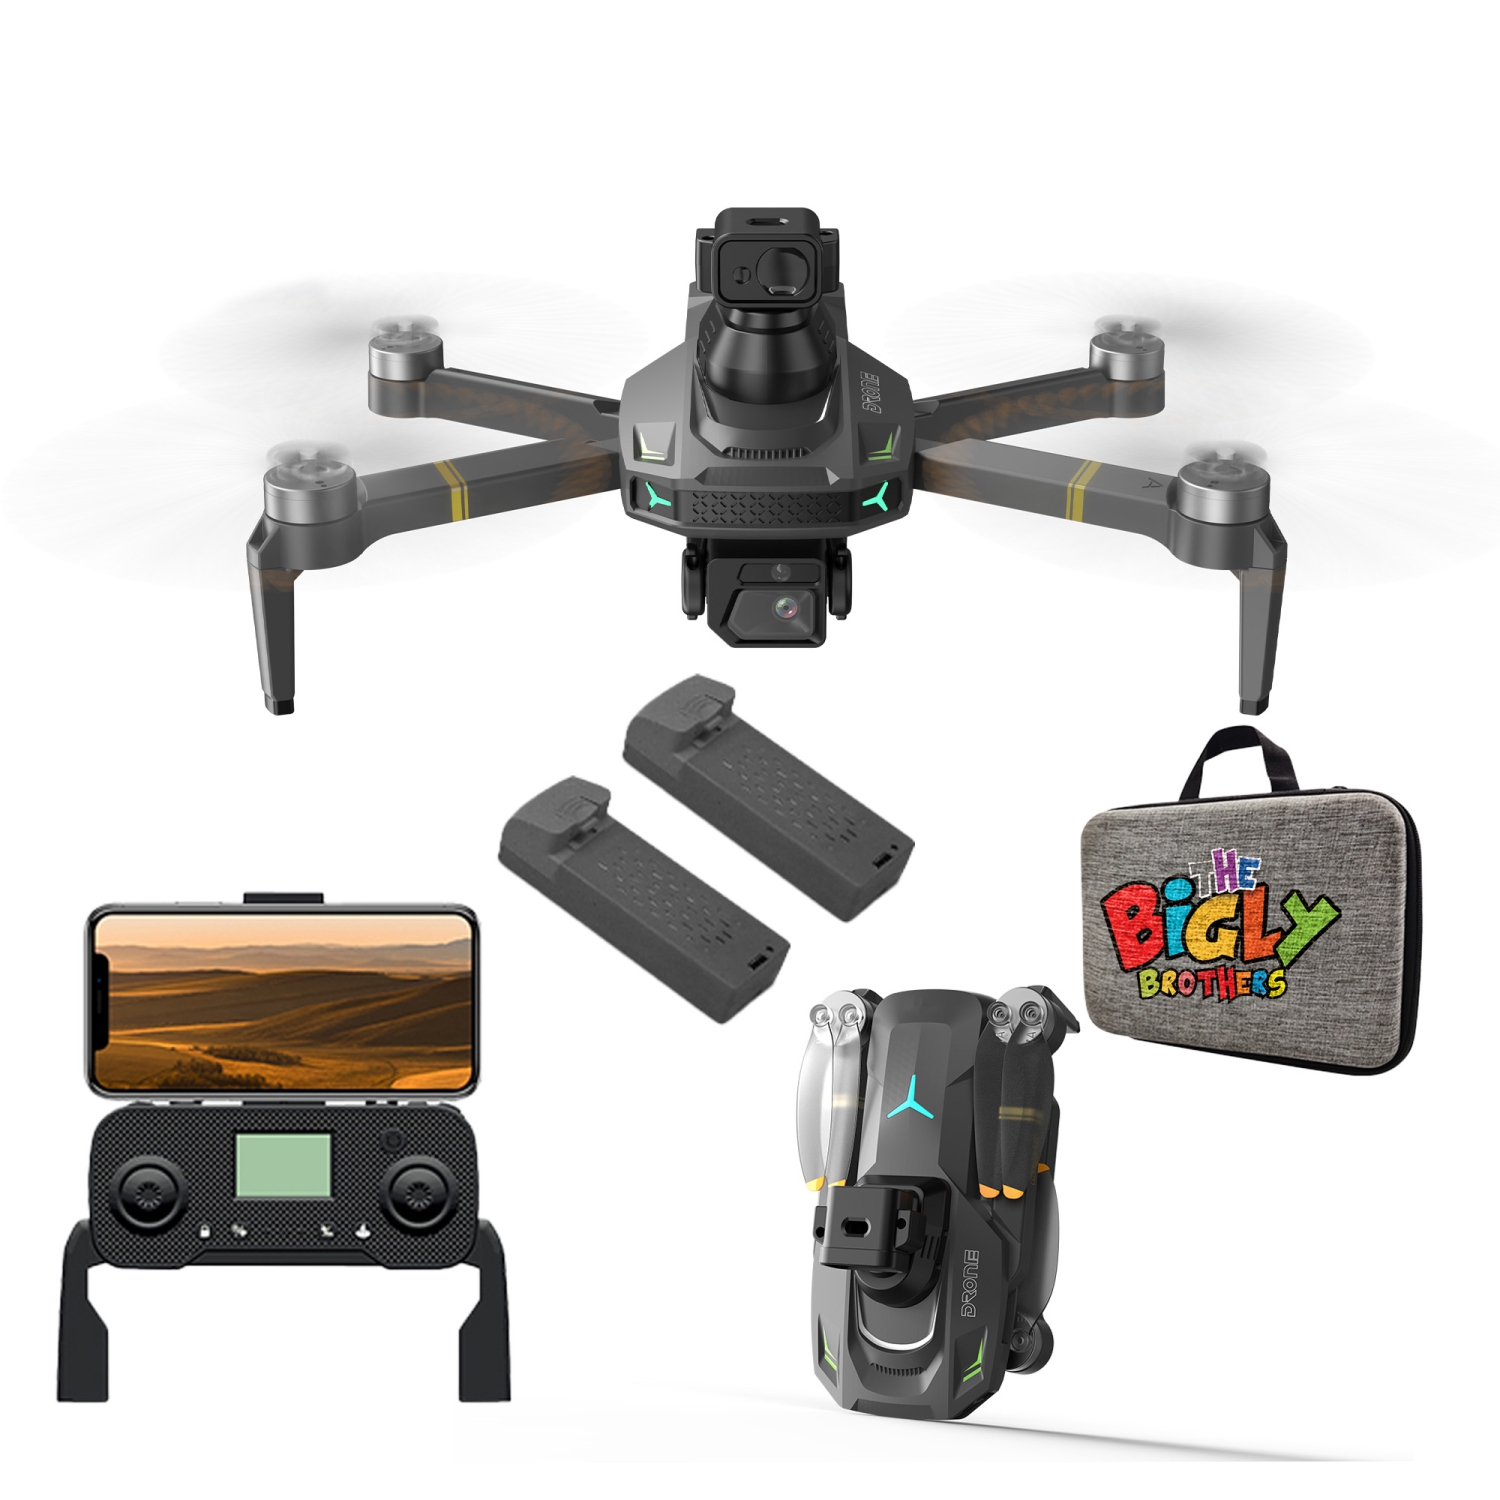 The Bigly Brothers E59 Mark III Delta Black Superior Edition, GPS Drone, Below 249 Grams, 4k Camera, 1 Key Return Home, All Around Obstacle Avoidance, Case & 2 Batt Included